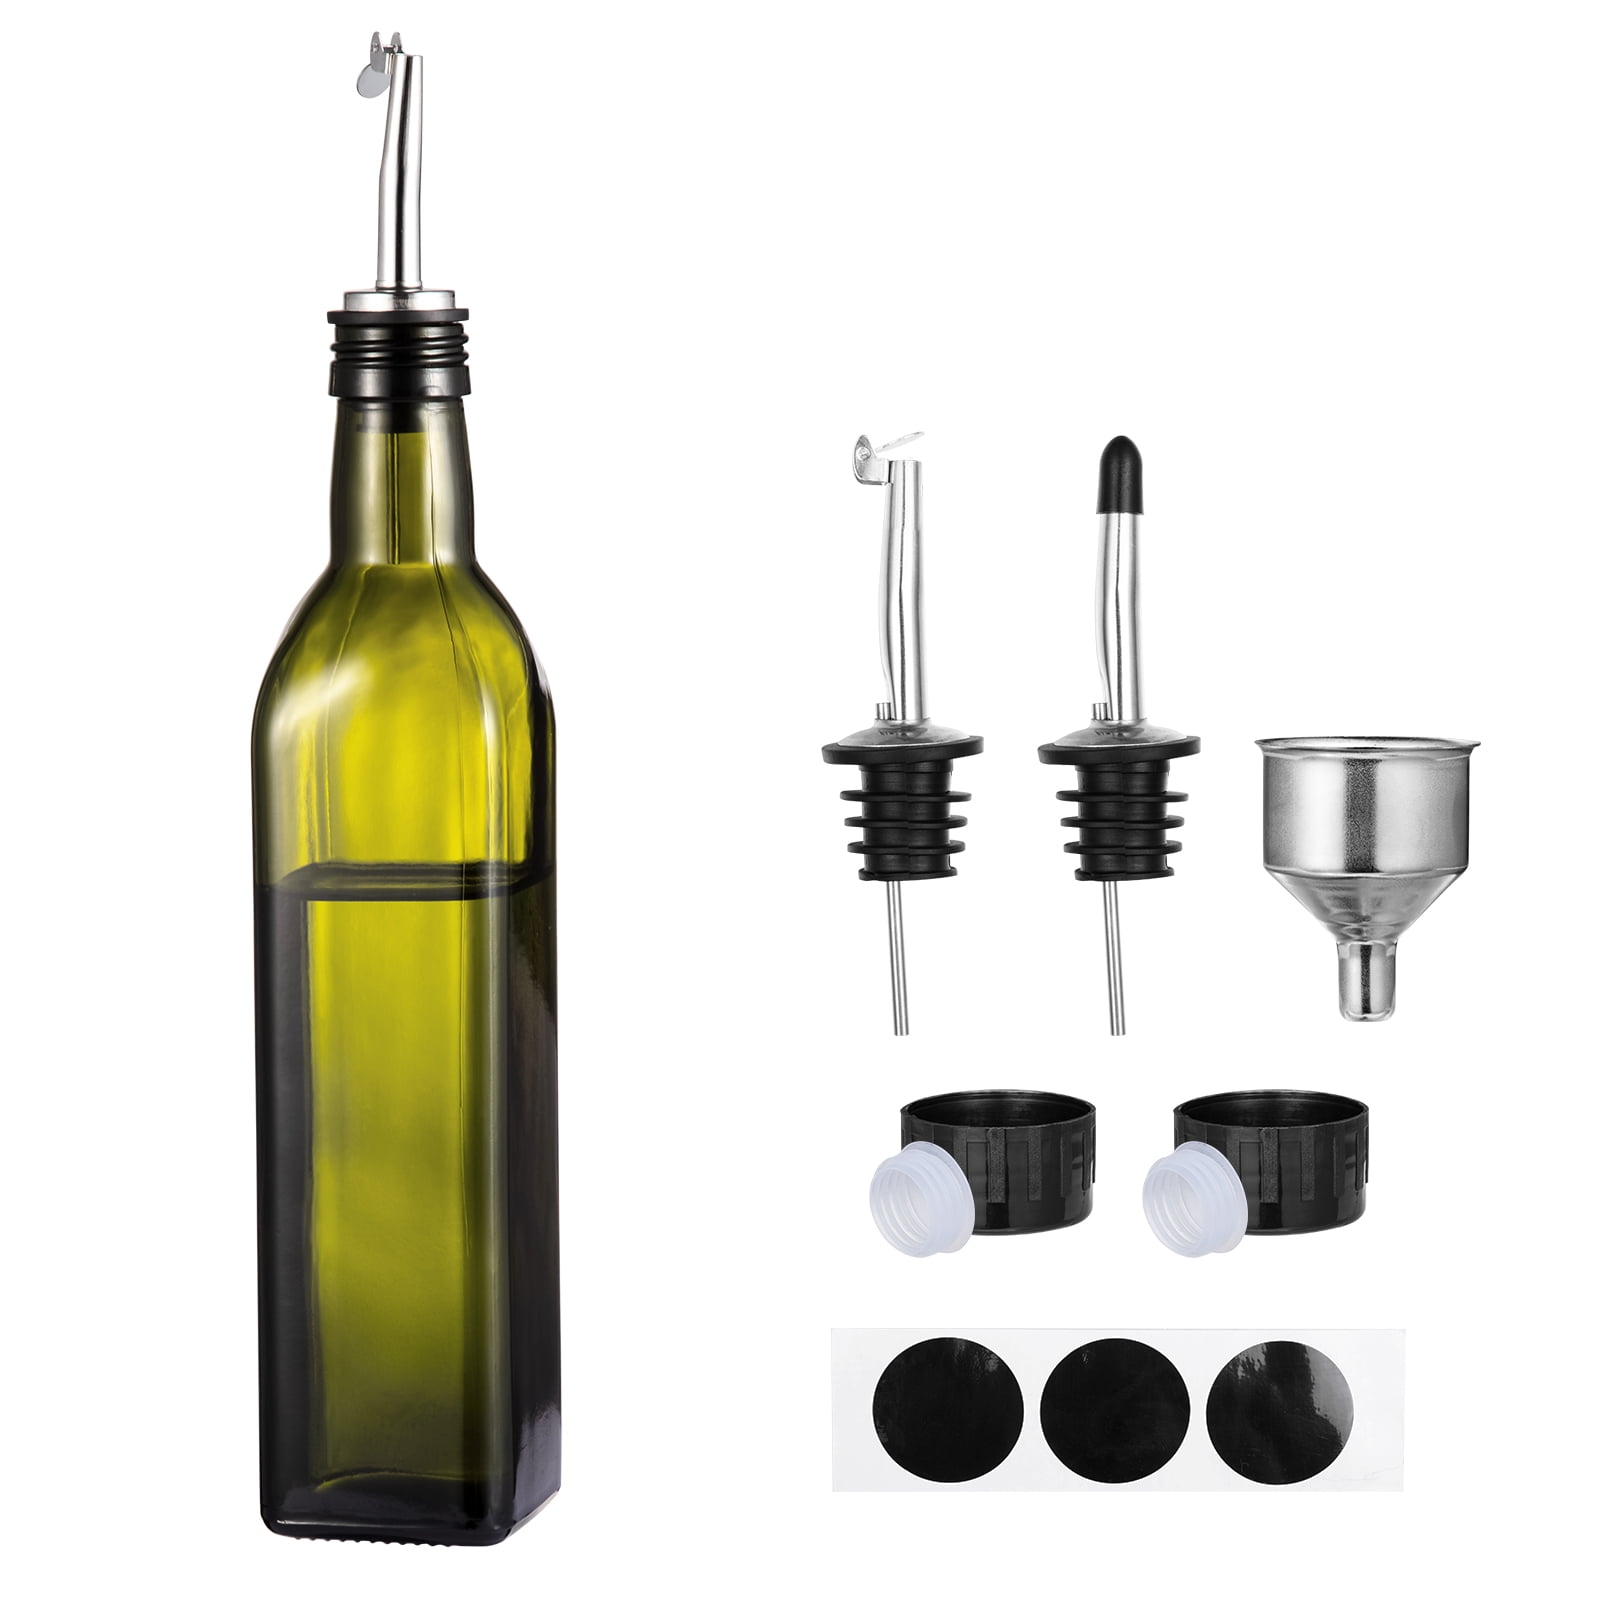 RW Base 17 oz Black Glass Olive Oil Dispenser - with Stainless Steel Pourer  - 2 1/4 x 2 1/4 x 12 1/2 - 1 count box